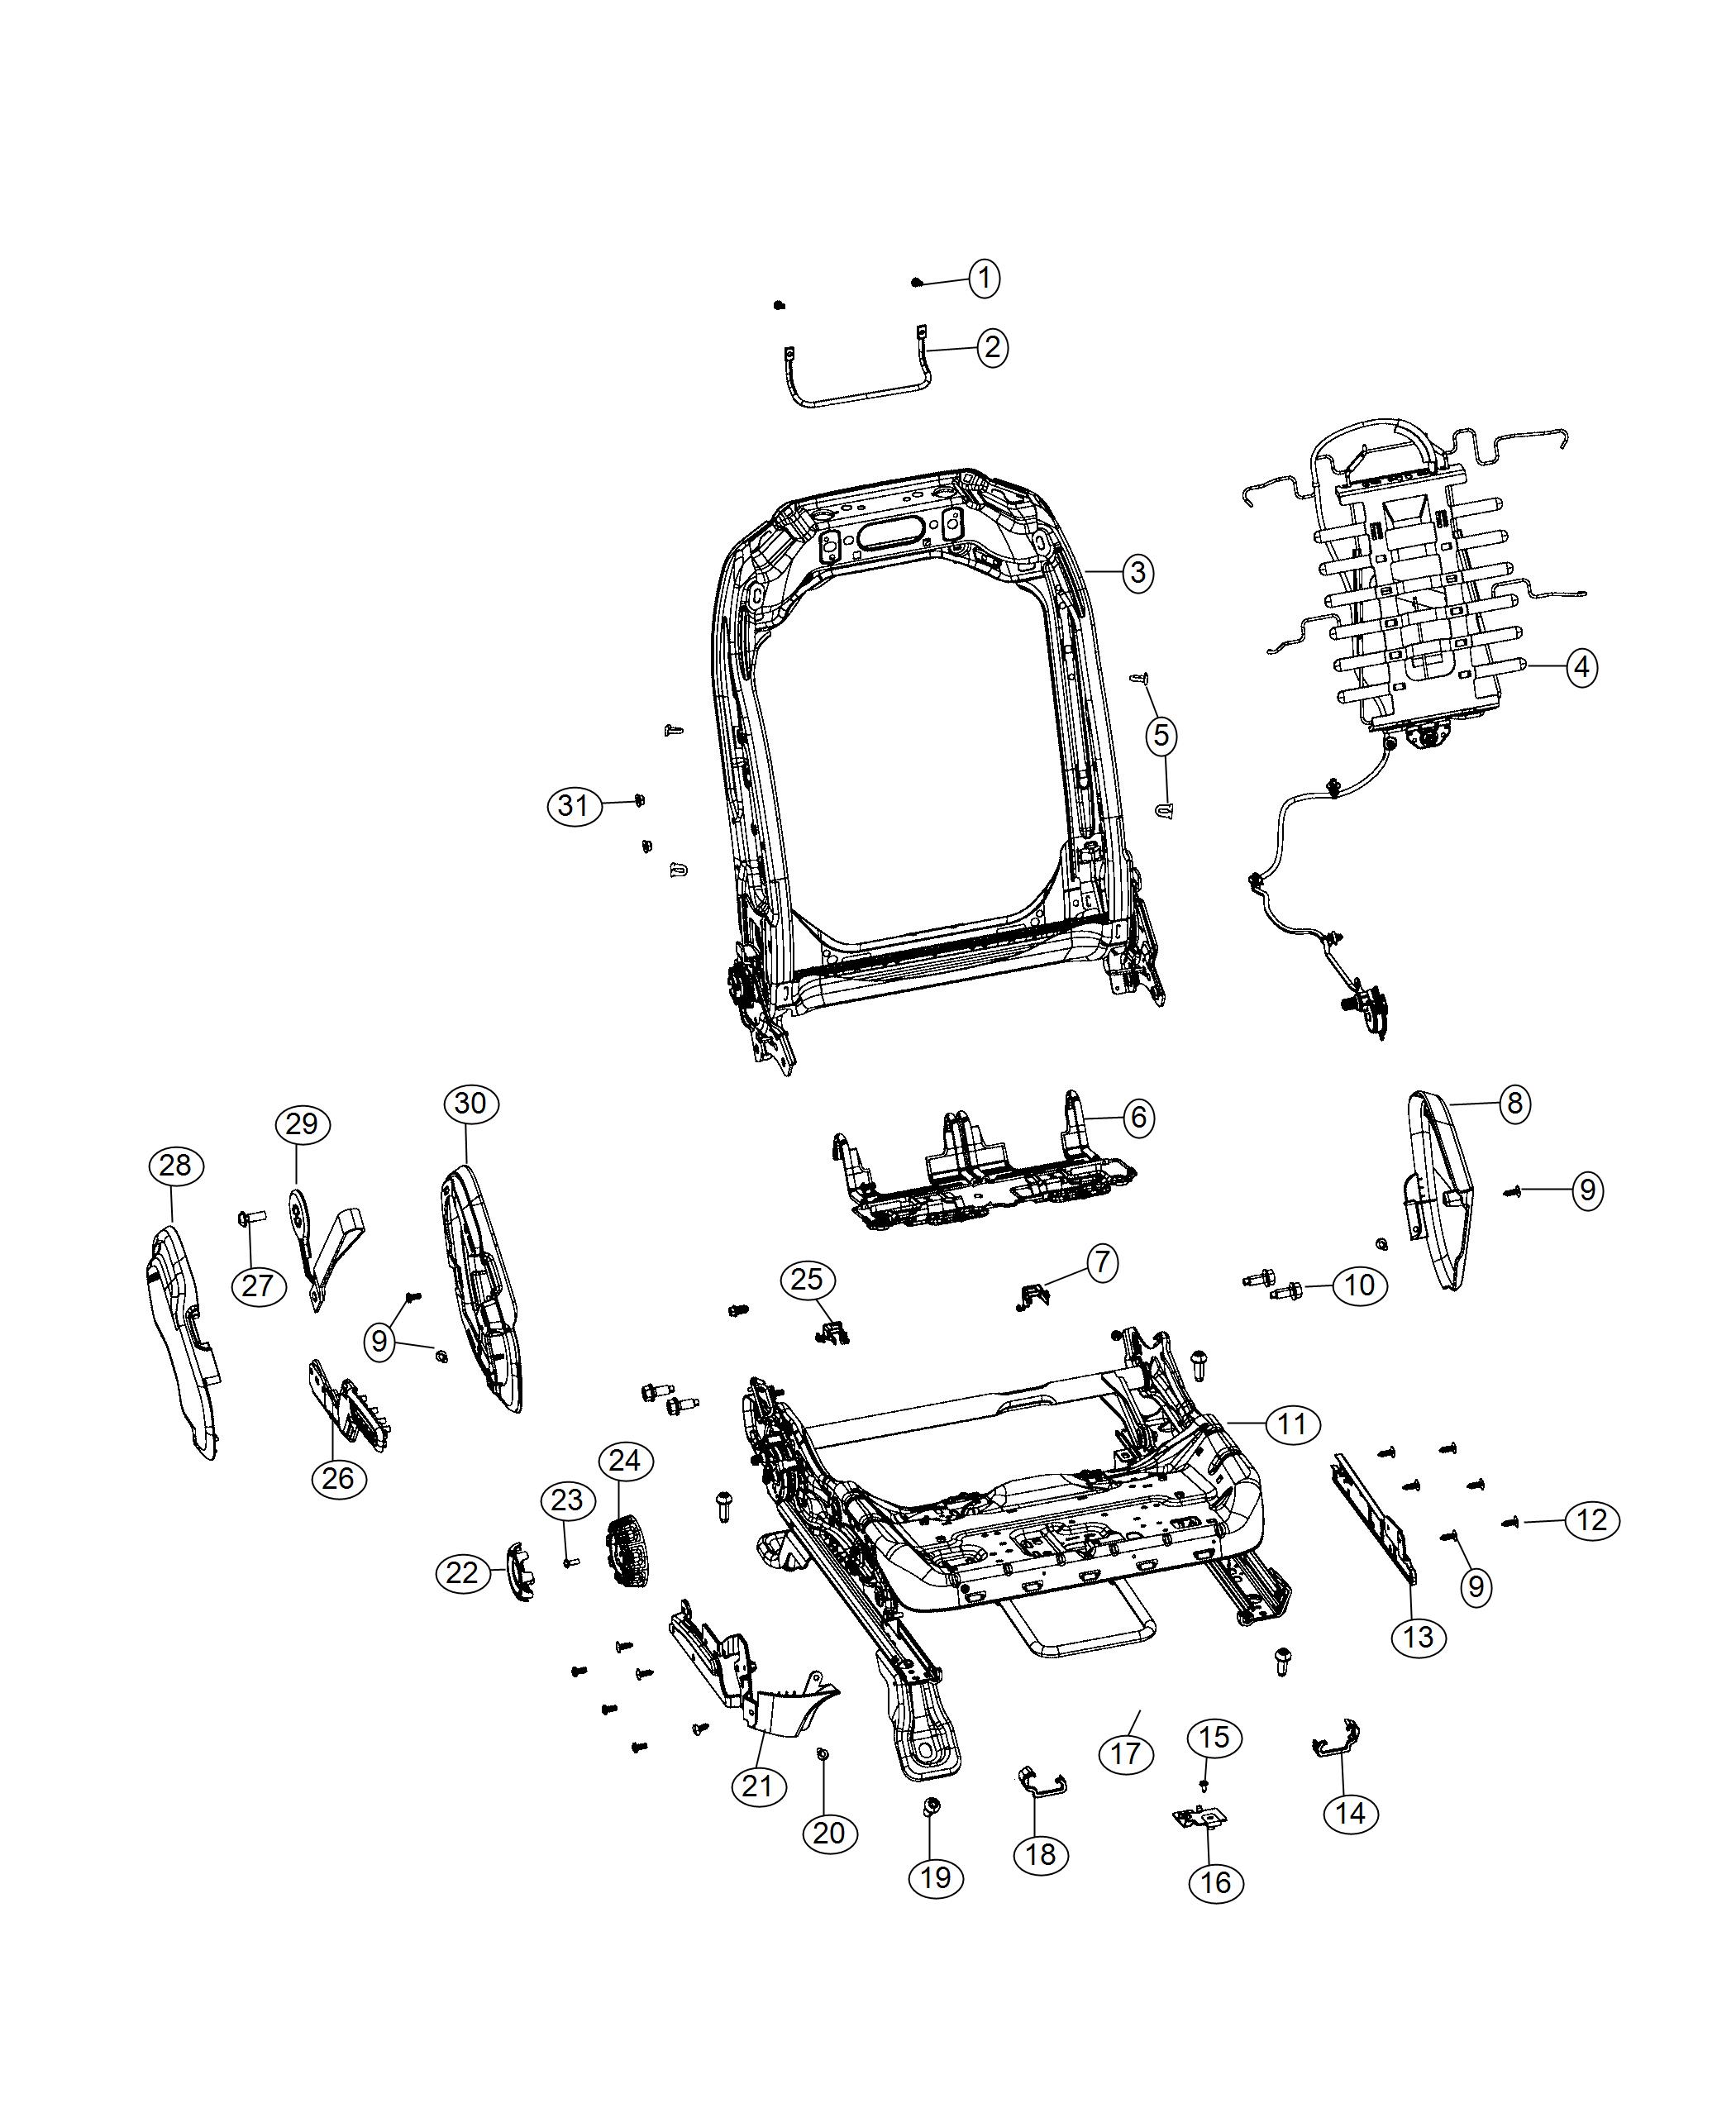 Diagram Adjusters, Recliners, Shields and Risers - Driver Seat - 74 Body. for your Jeep Wrangler  